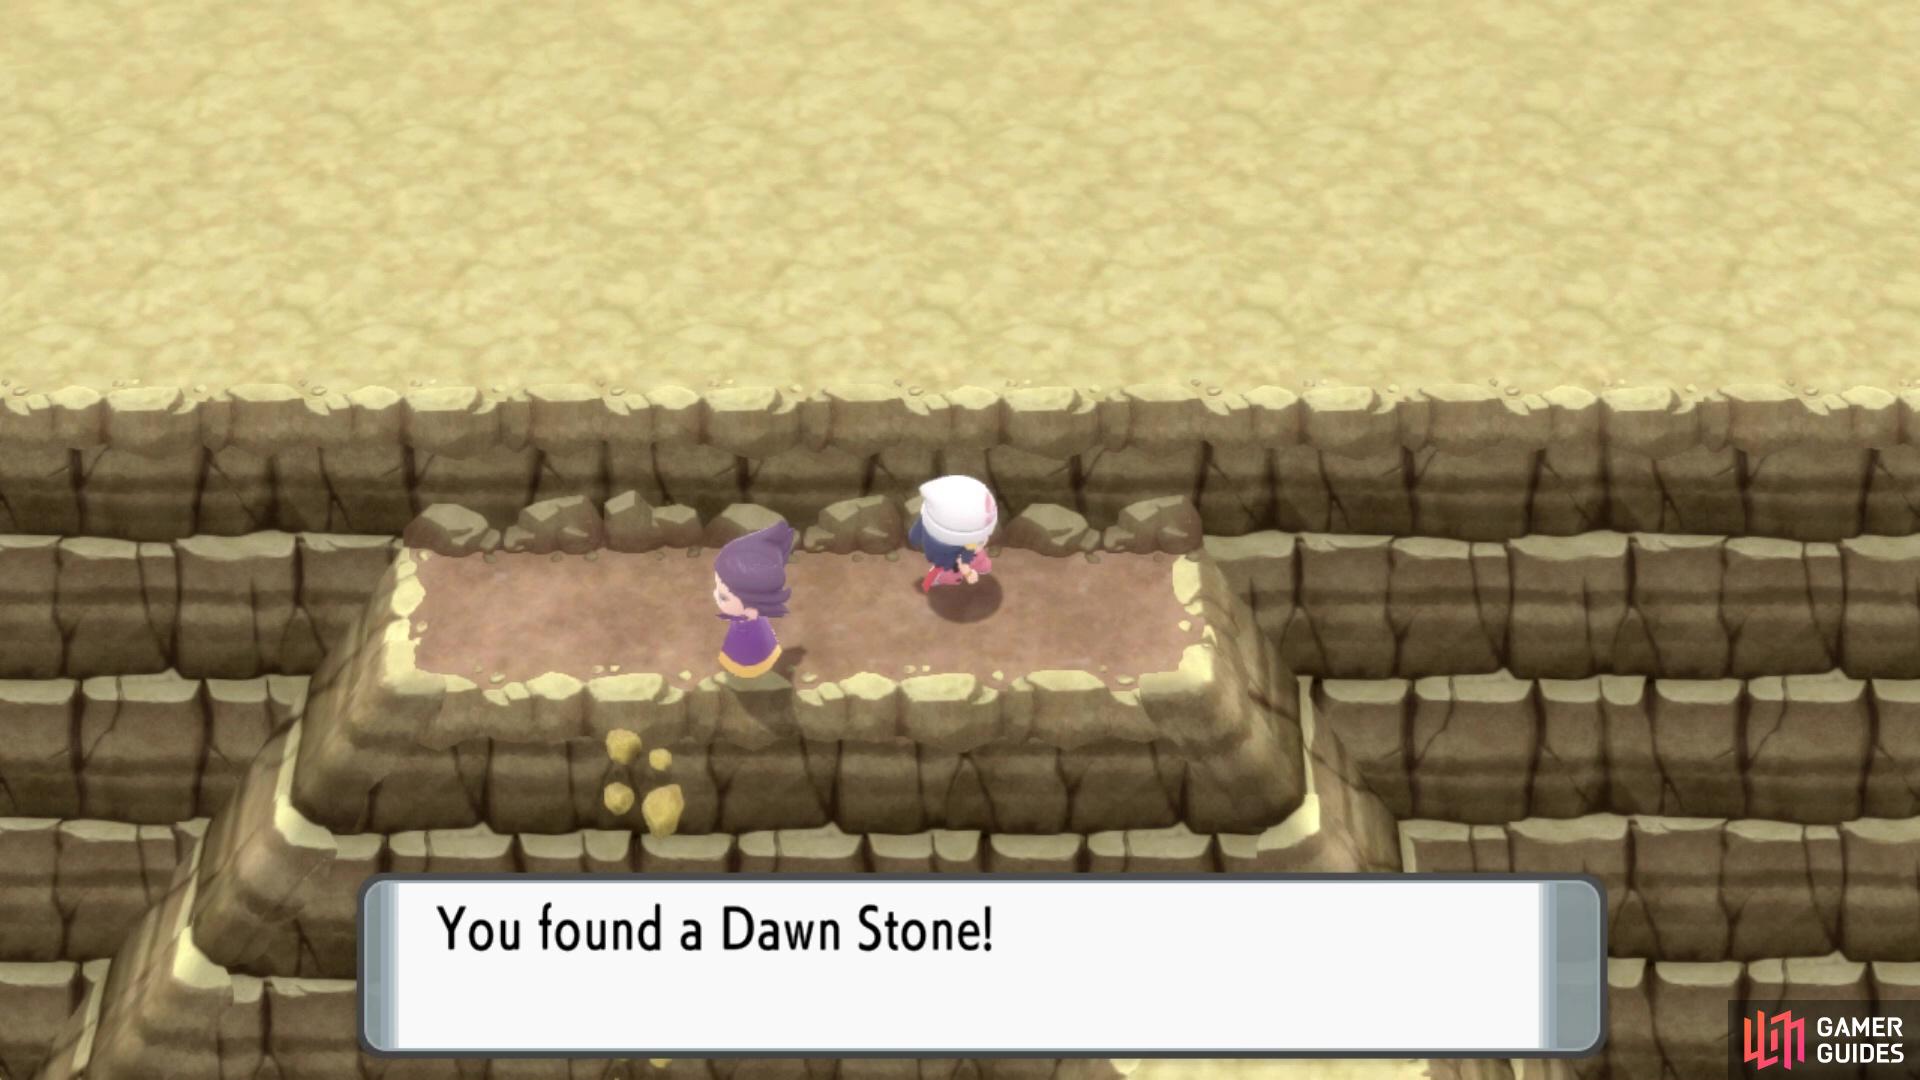 How to Get Dawn Stones - Pokemon Diamond, Pearl and Platinum Guide